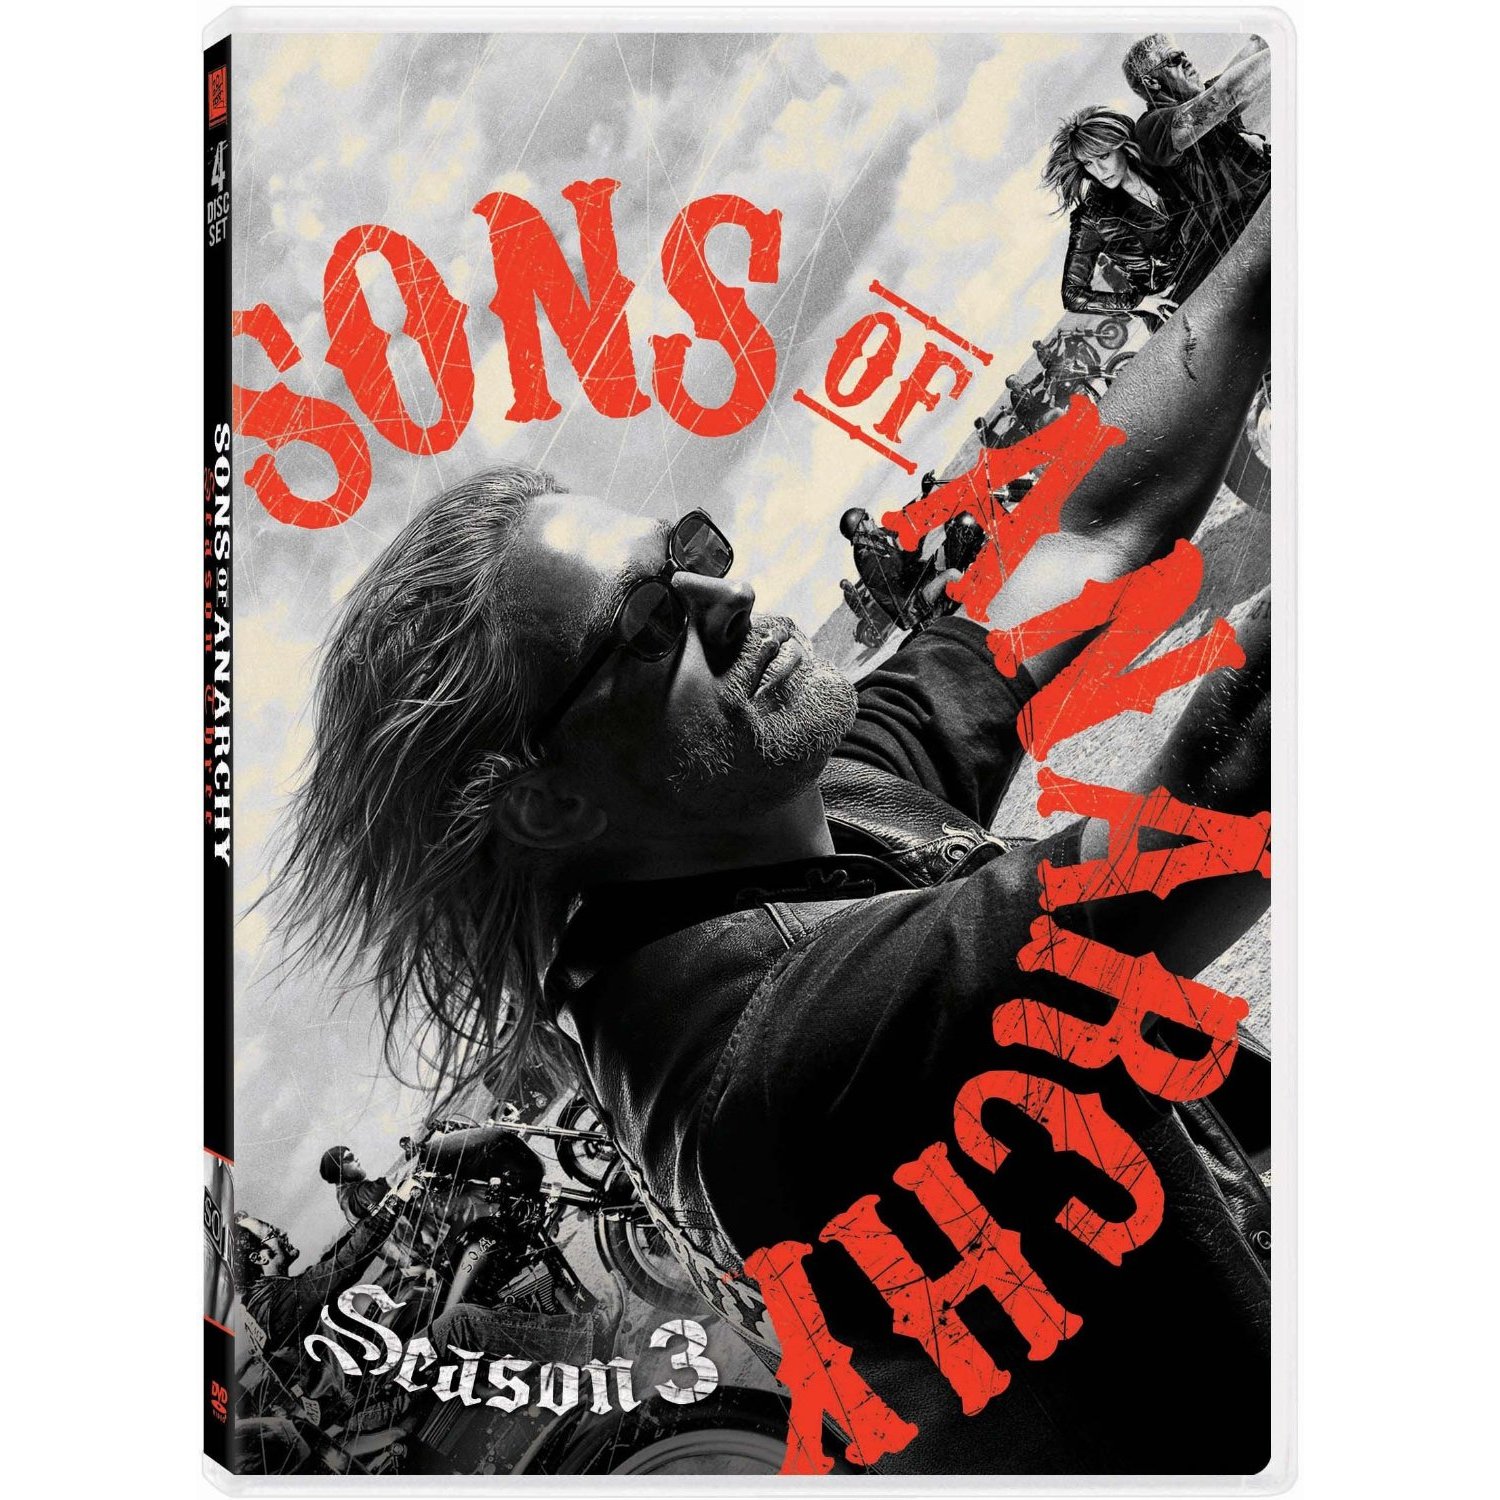 Sons of Anarchy Season 3 Disk 4